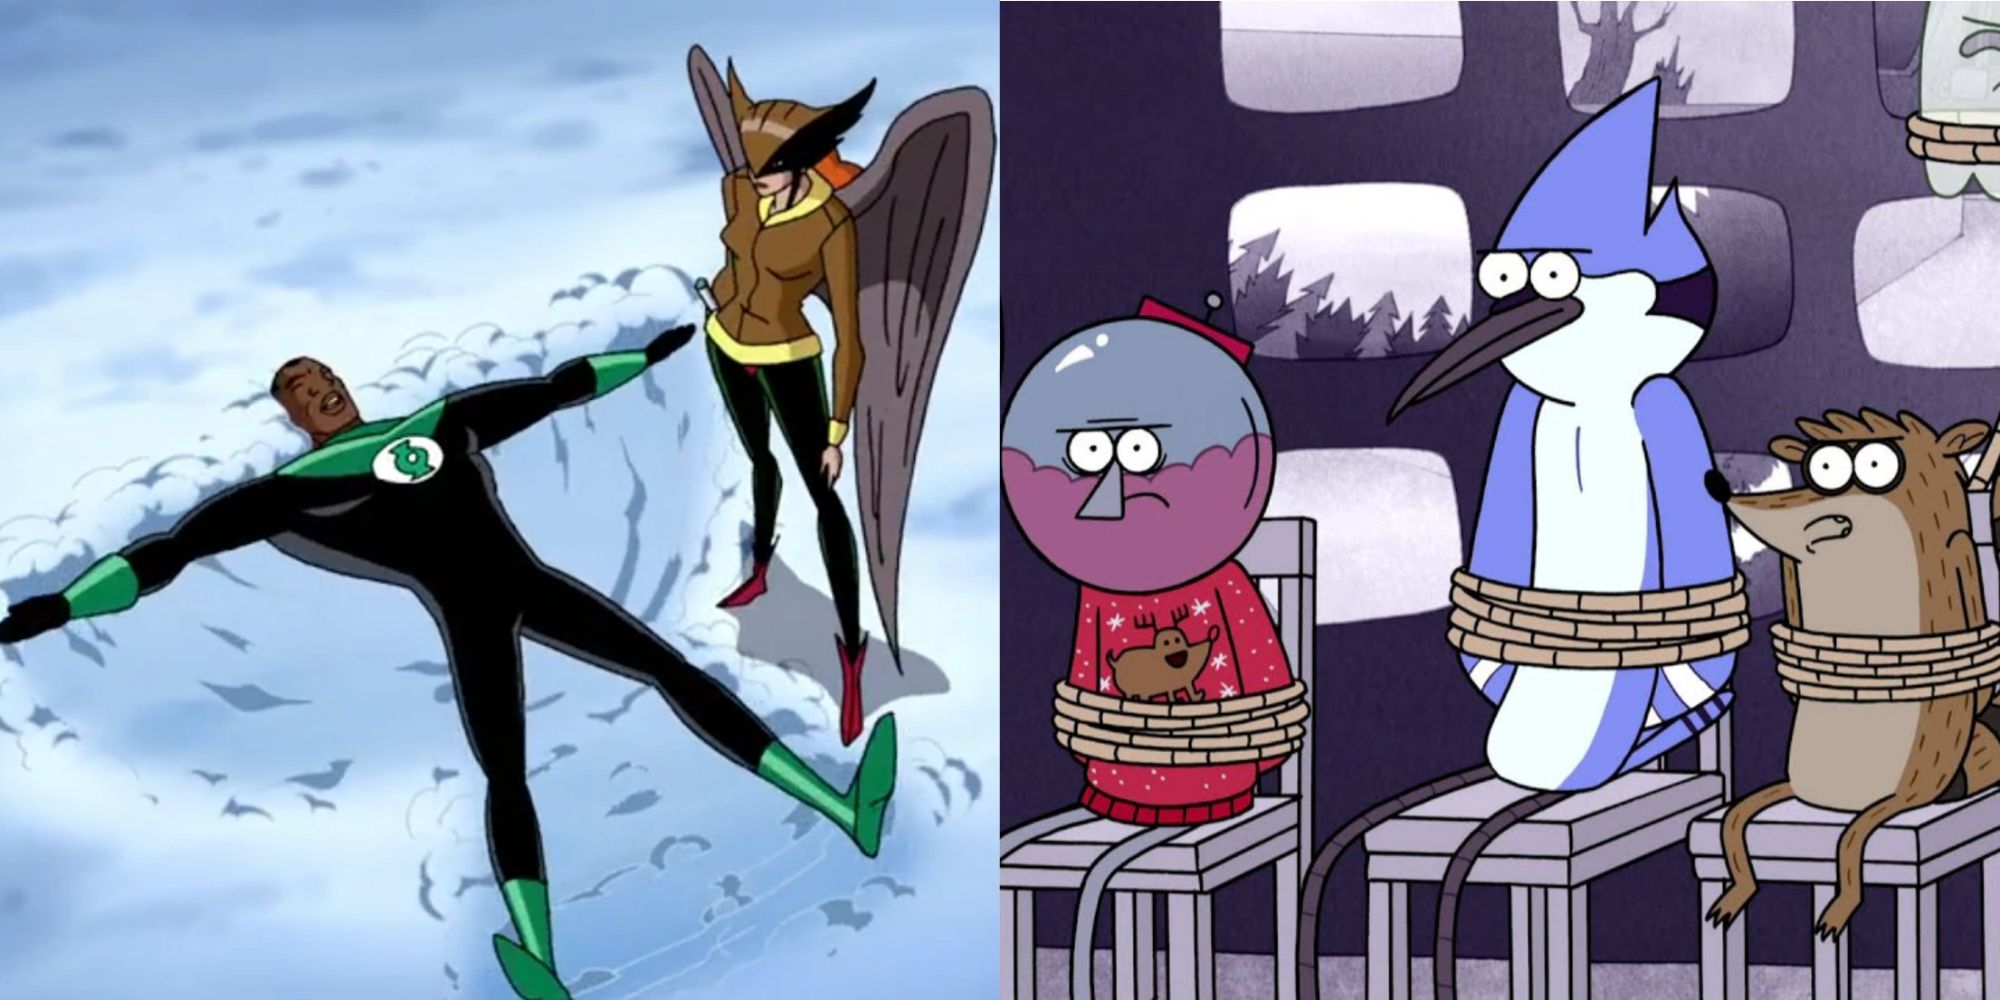 Green Lantern makes snow angels while Mordecai and Rigby watch while tied up